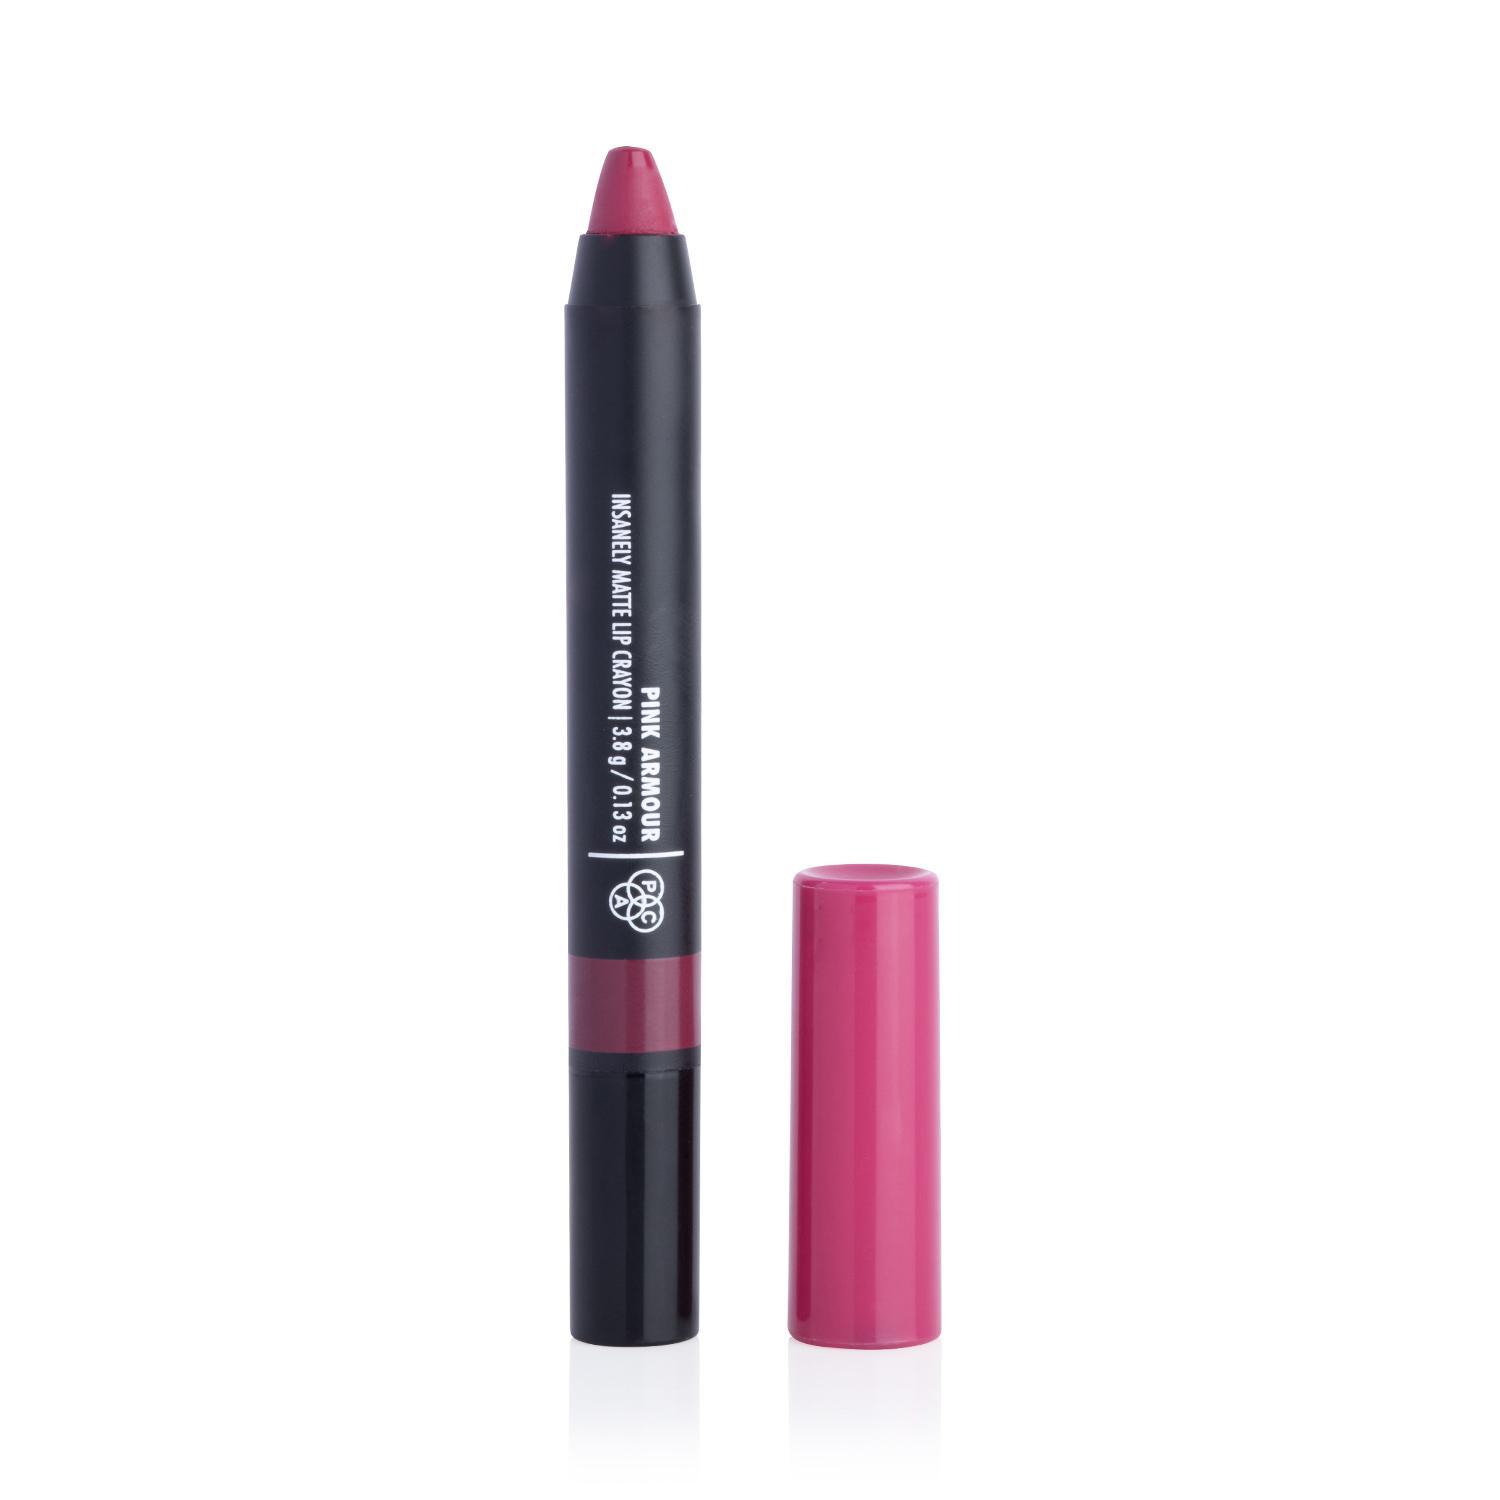 pac insanely matte lip crayon - pink armour (3.8g)